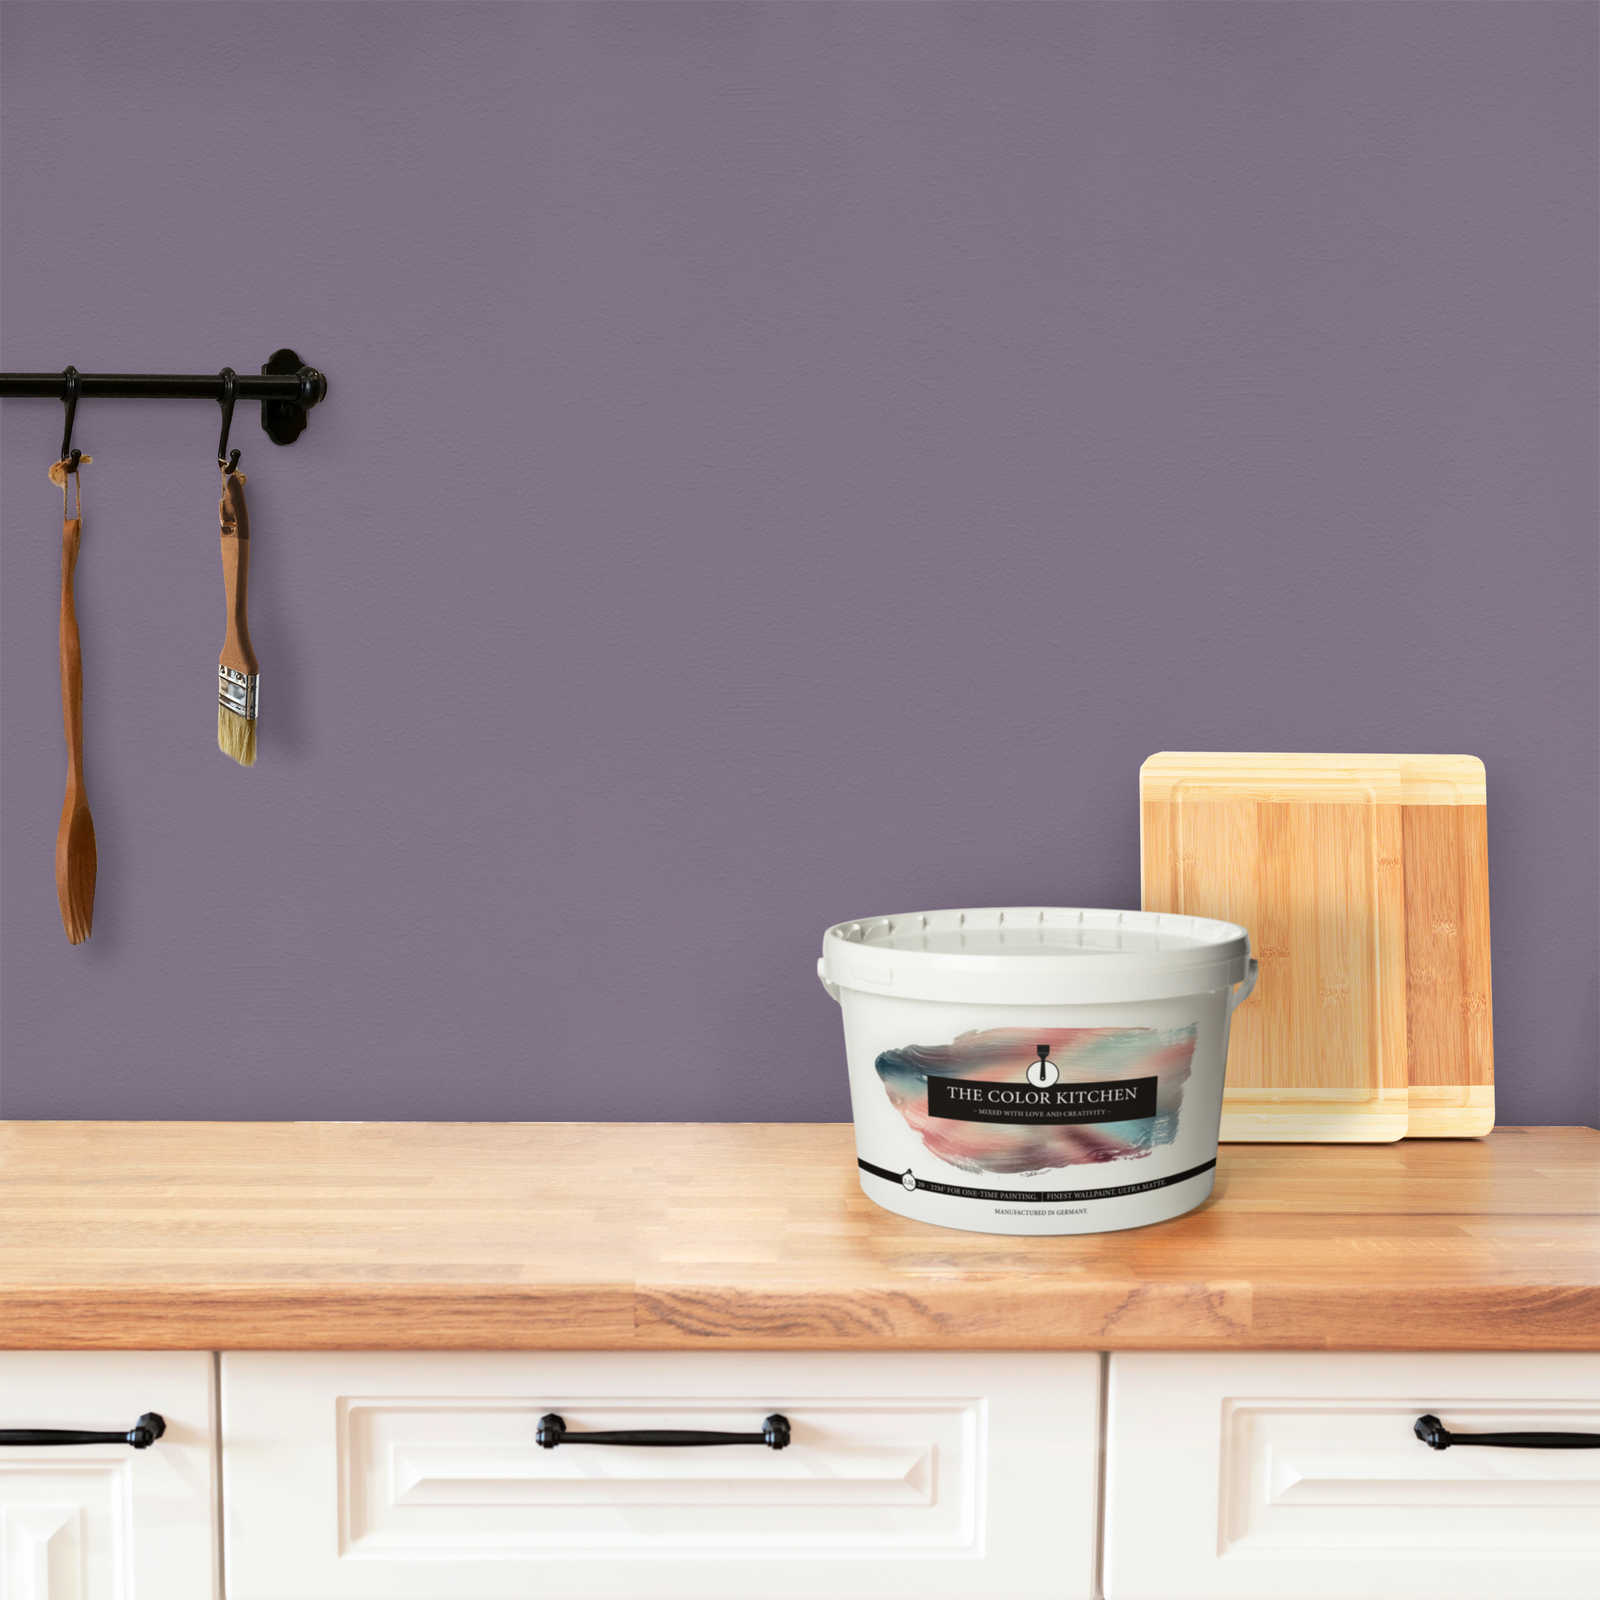             Wall Paint TCK2006 »Artful Aubergine« in strong violet – 2.5 litre
        